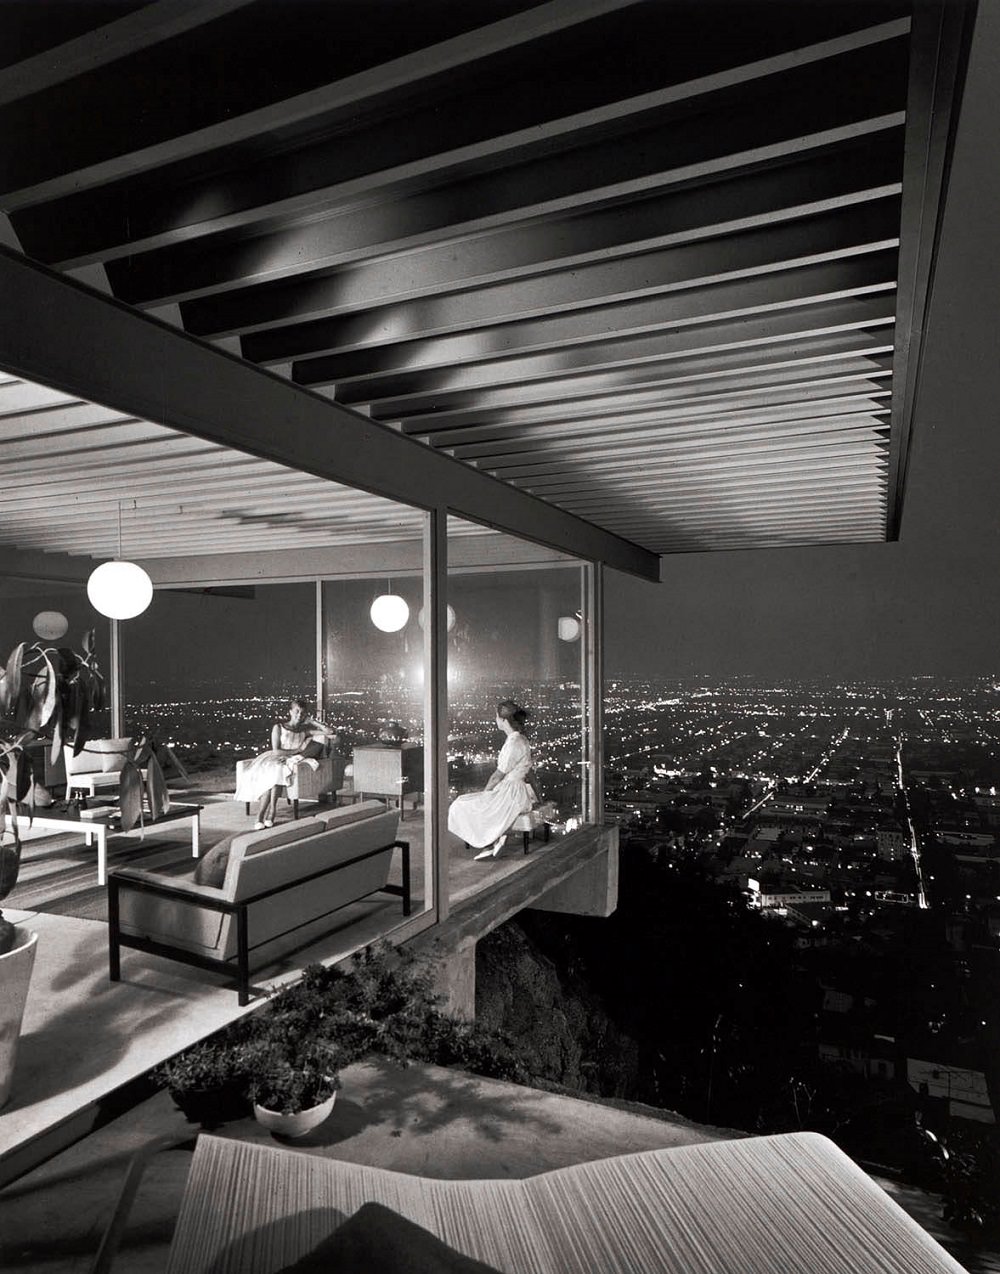 Julius Shulman's nighttime shot of Ann Lightbody and Cynthia Murfee in Case Study House No. 22, the Stahl residence in the Hollywood Hills, May 9, 1960